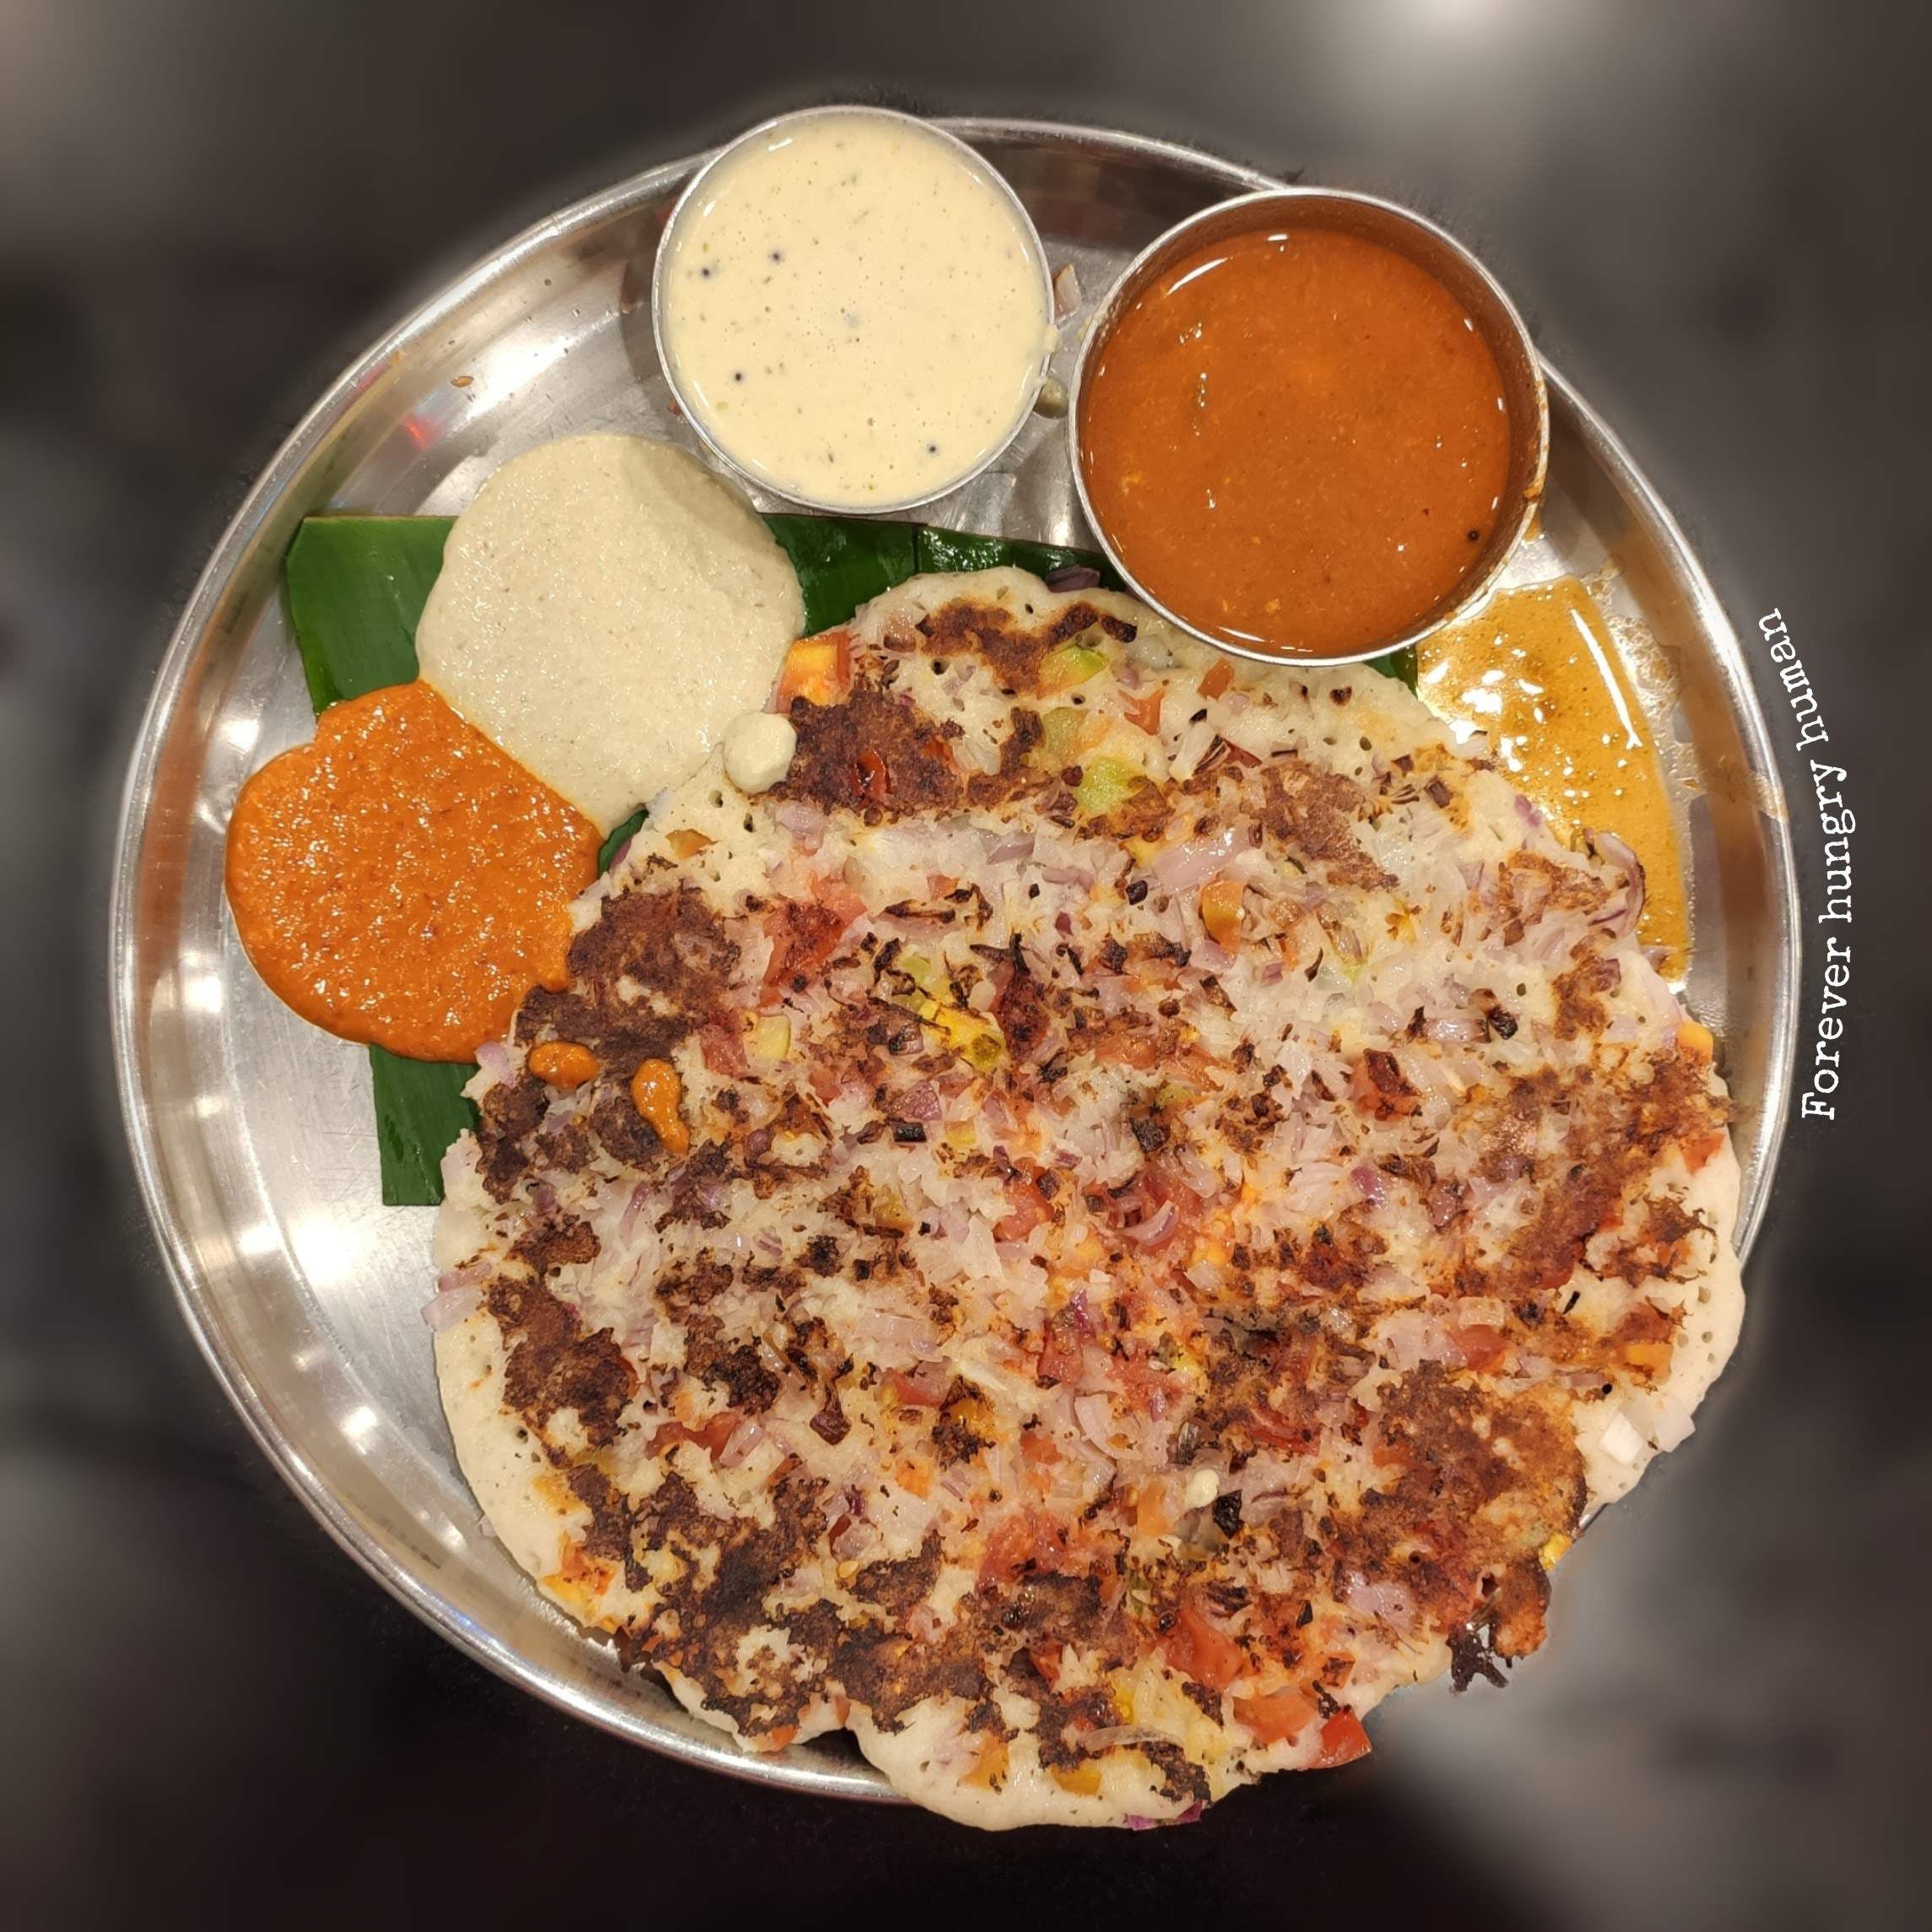 Dish,Food,Cuisine,Ingredient,Uttapam,Indian cuisine,Produce,Paratha,Meal,Lunch